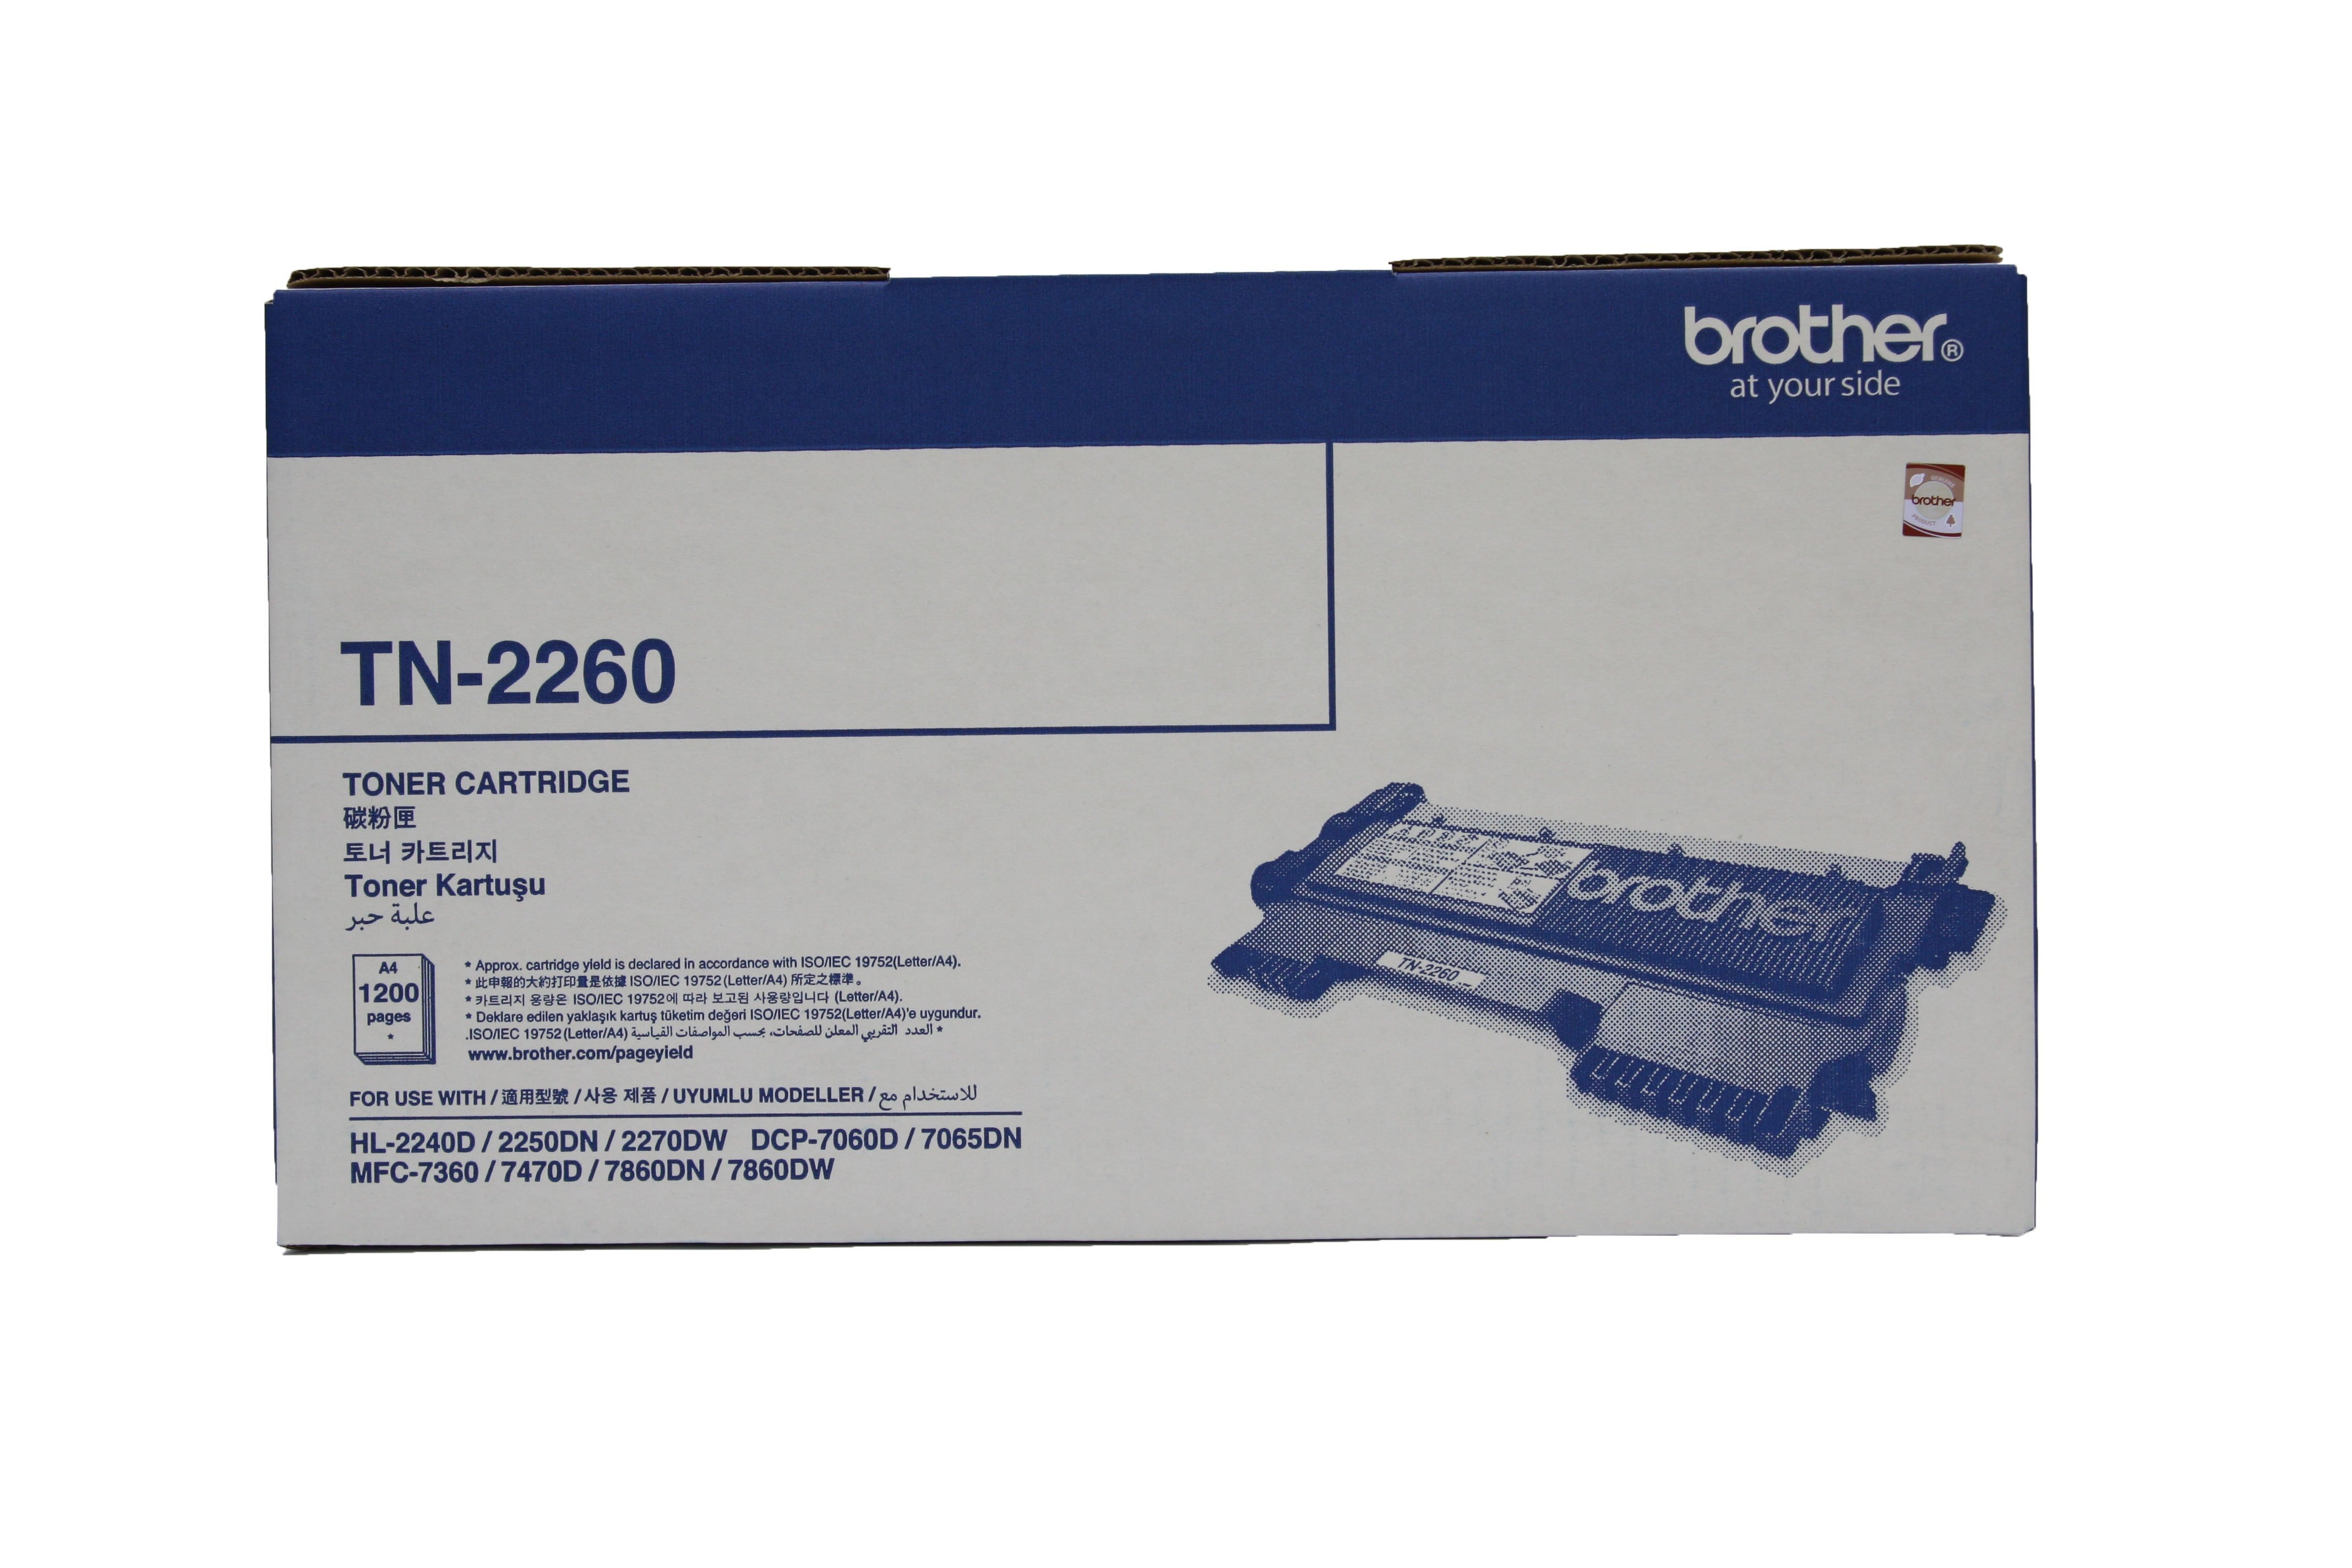 Brother TN-2260 Toner Cartridge for HL-2250 2240D DCP-7060D, 7065DN, MFC-7360 7860DW and FAX-2840